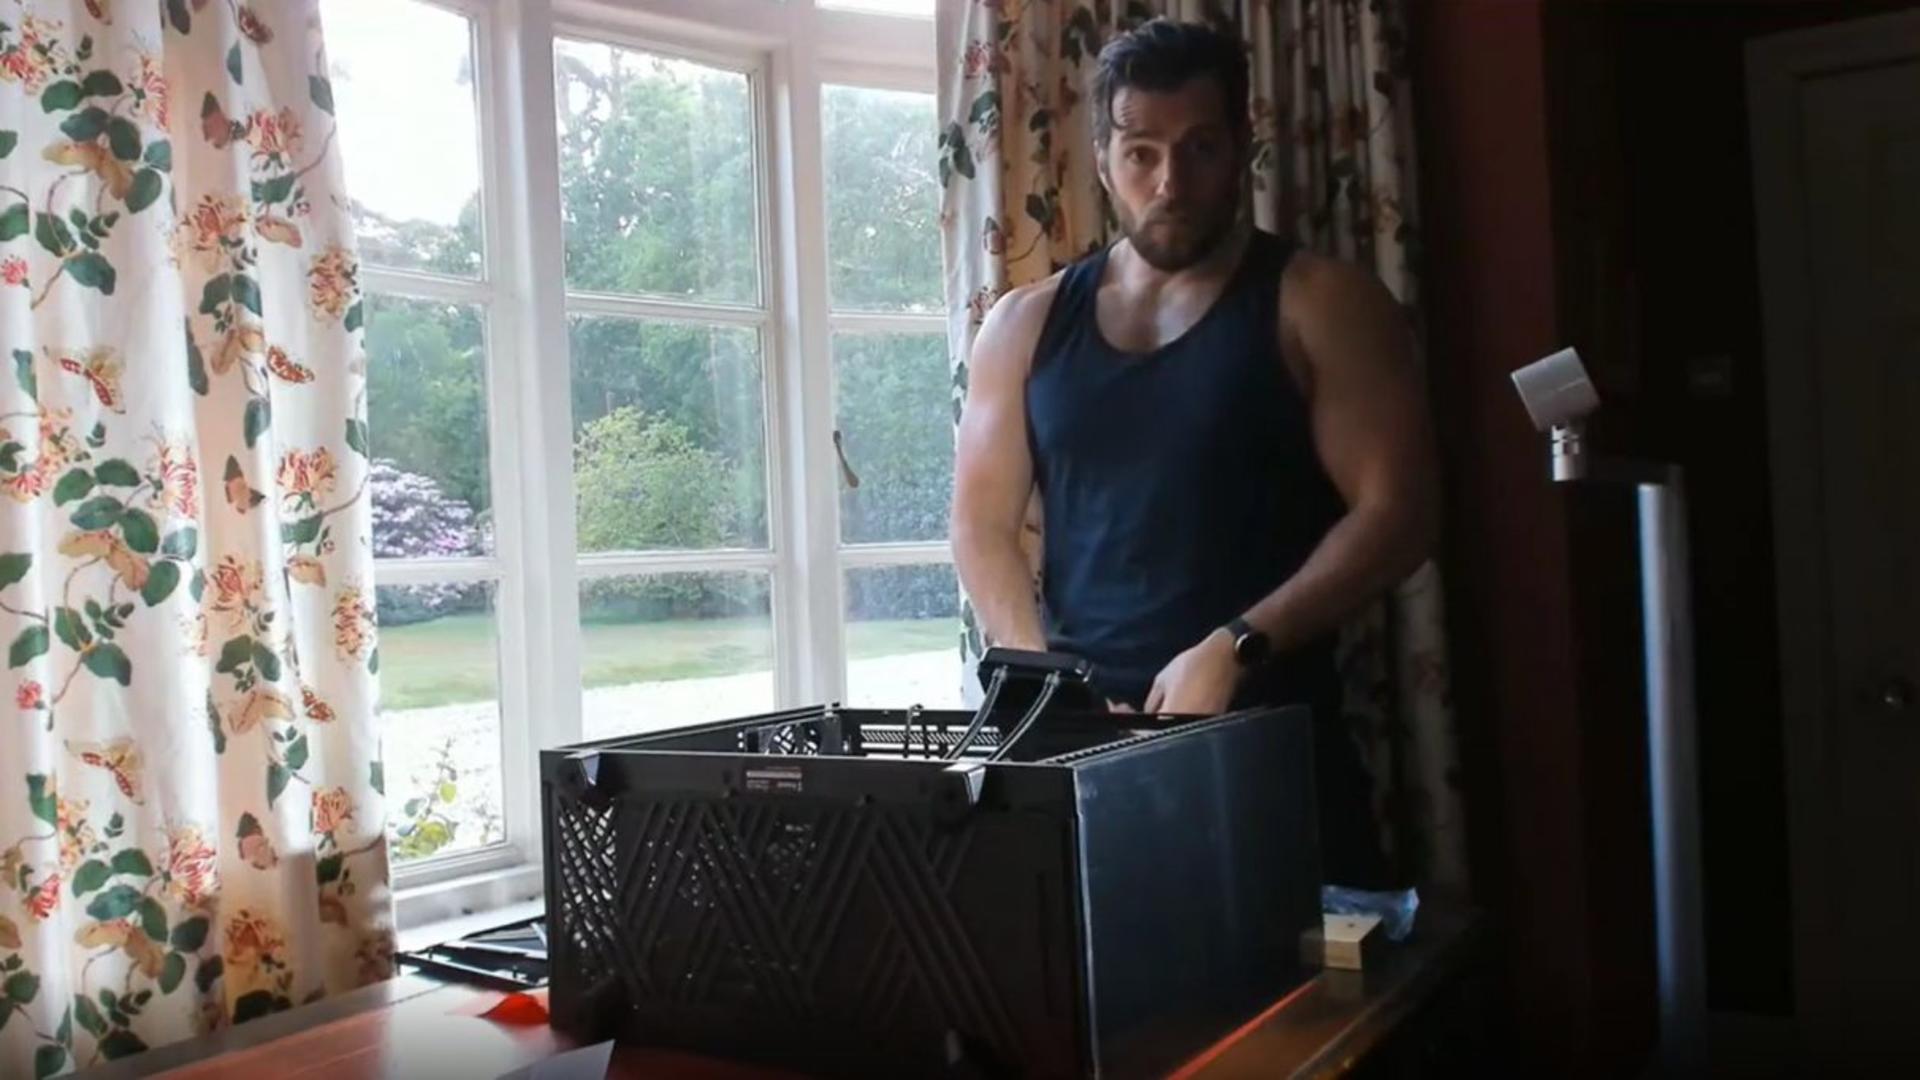 Watching Henry Cavill build a PC gave me a heart attack